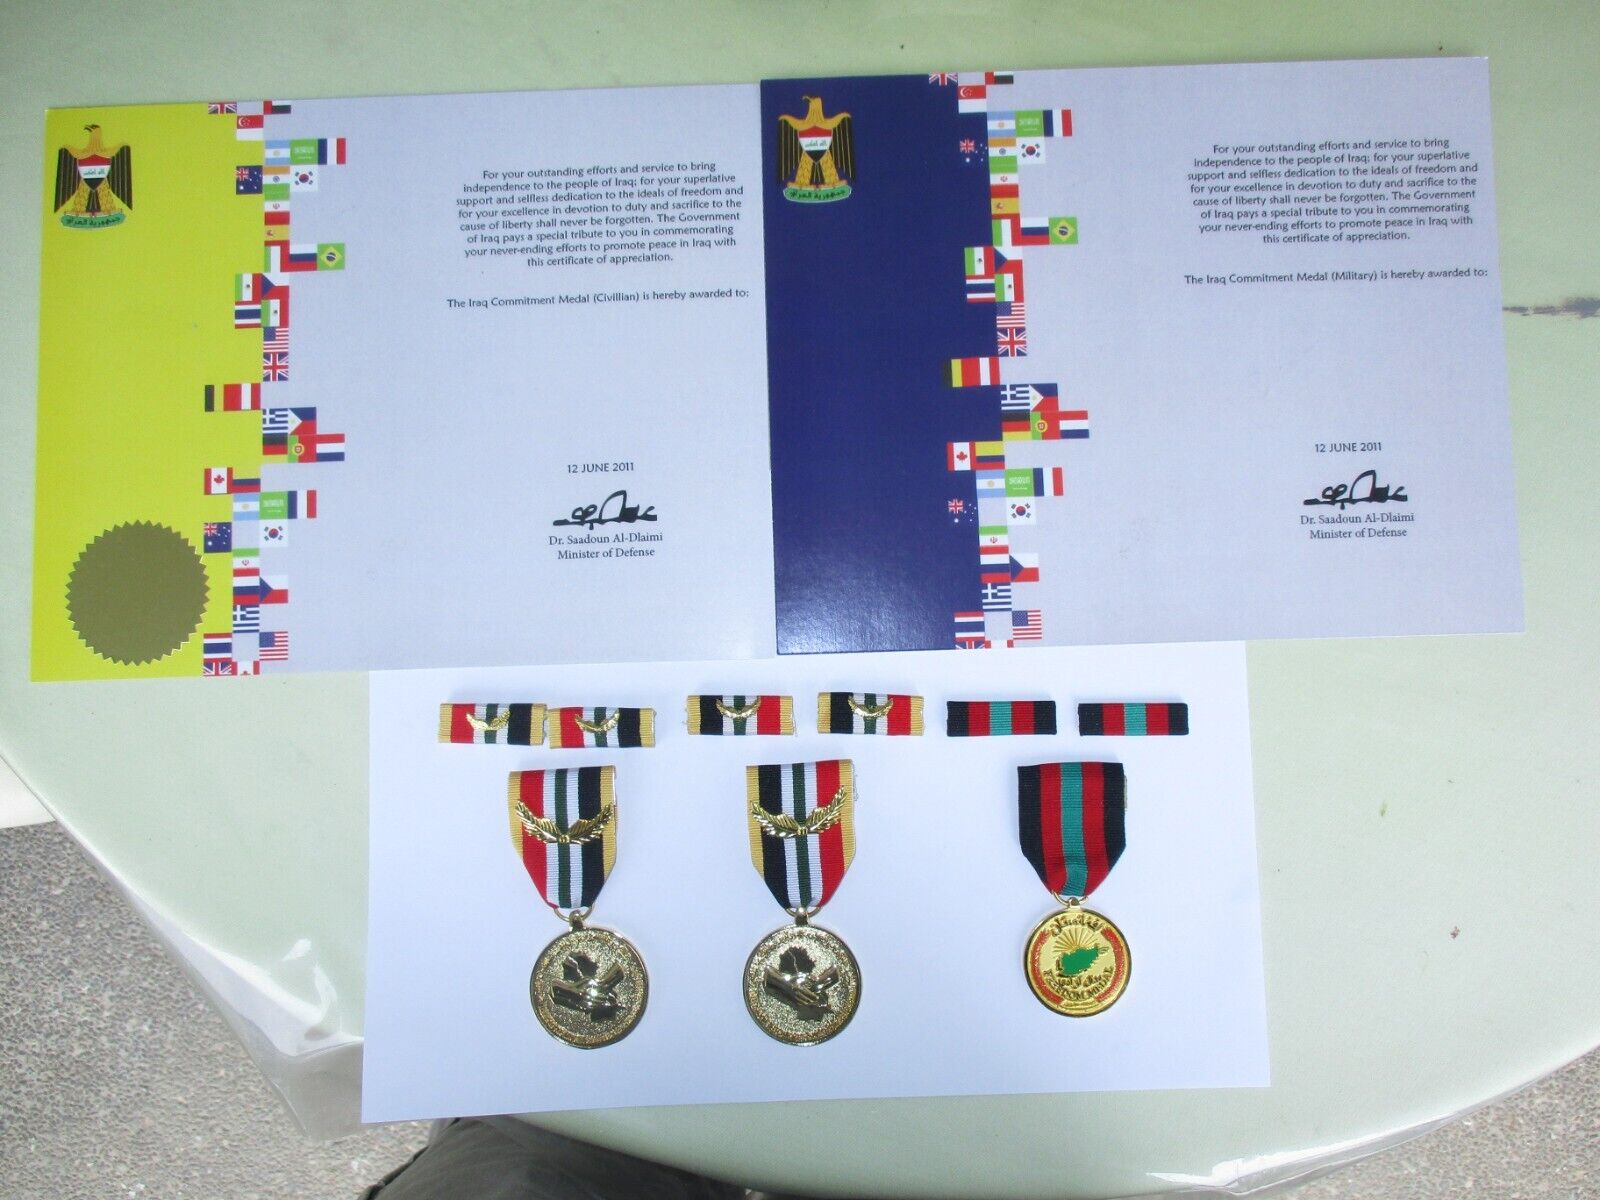 IRAQ COMMITMENT MEDAL (MILITARY & CIVILIAN) SETS/AFGHANISTAN FREEDOM MEDAL